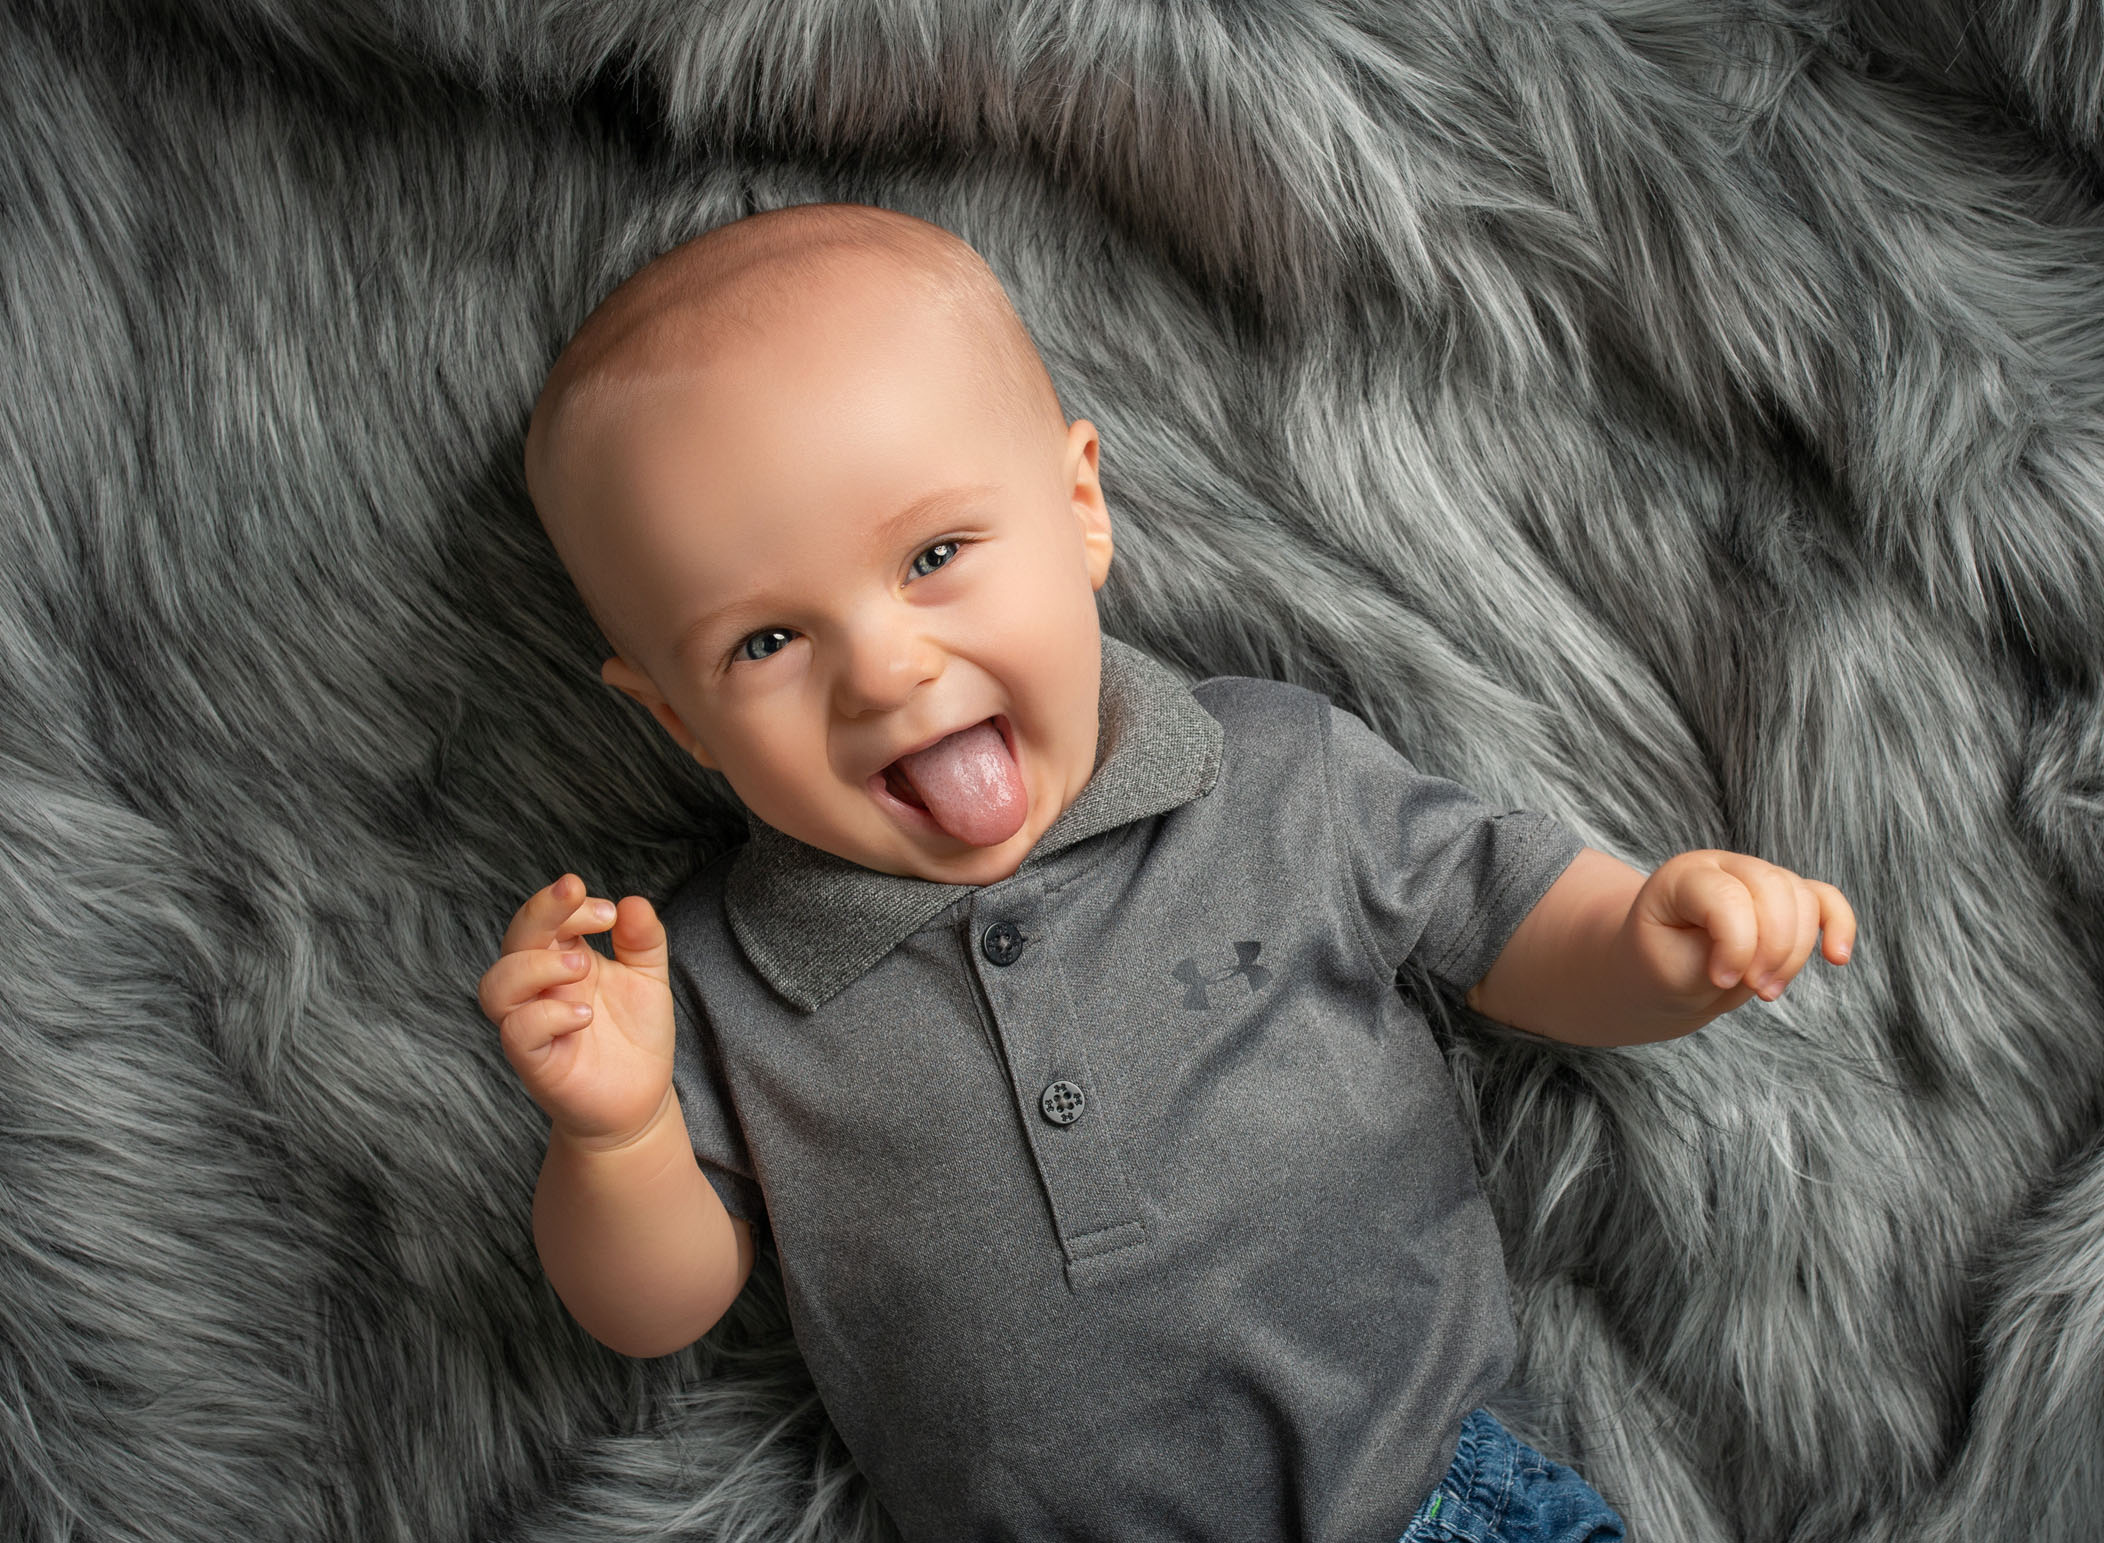 6 month old baby boy sticking his tongue out and smiling on grey fur blanket